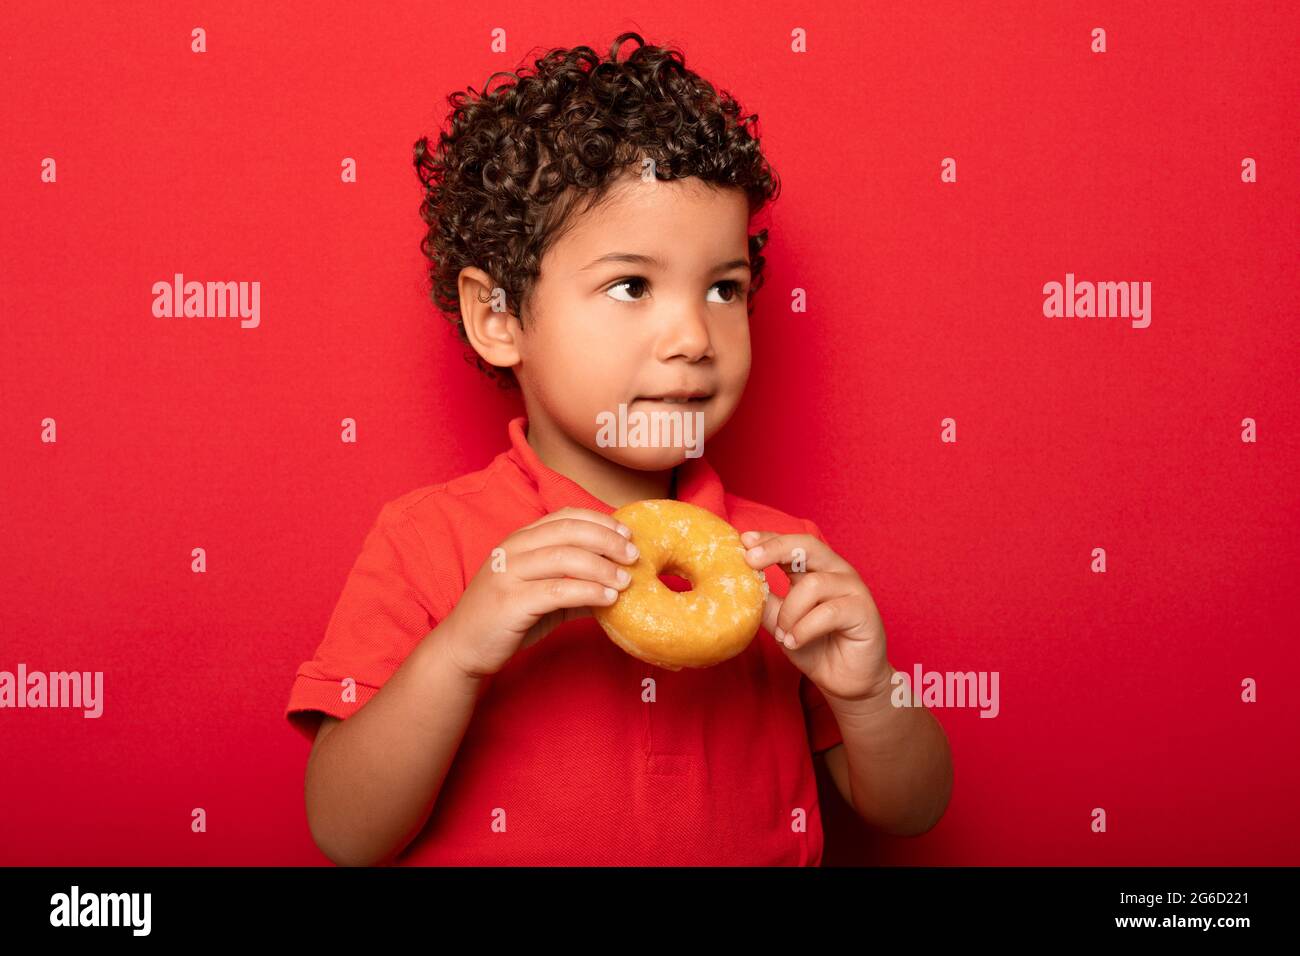 Adorable child with curly hair eating sweet tasty doughnut and looking away on red background Stock Photo